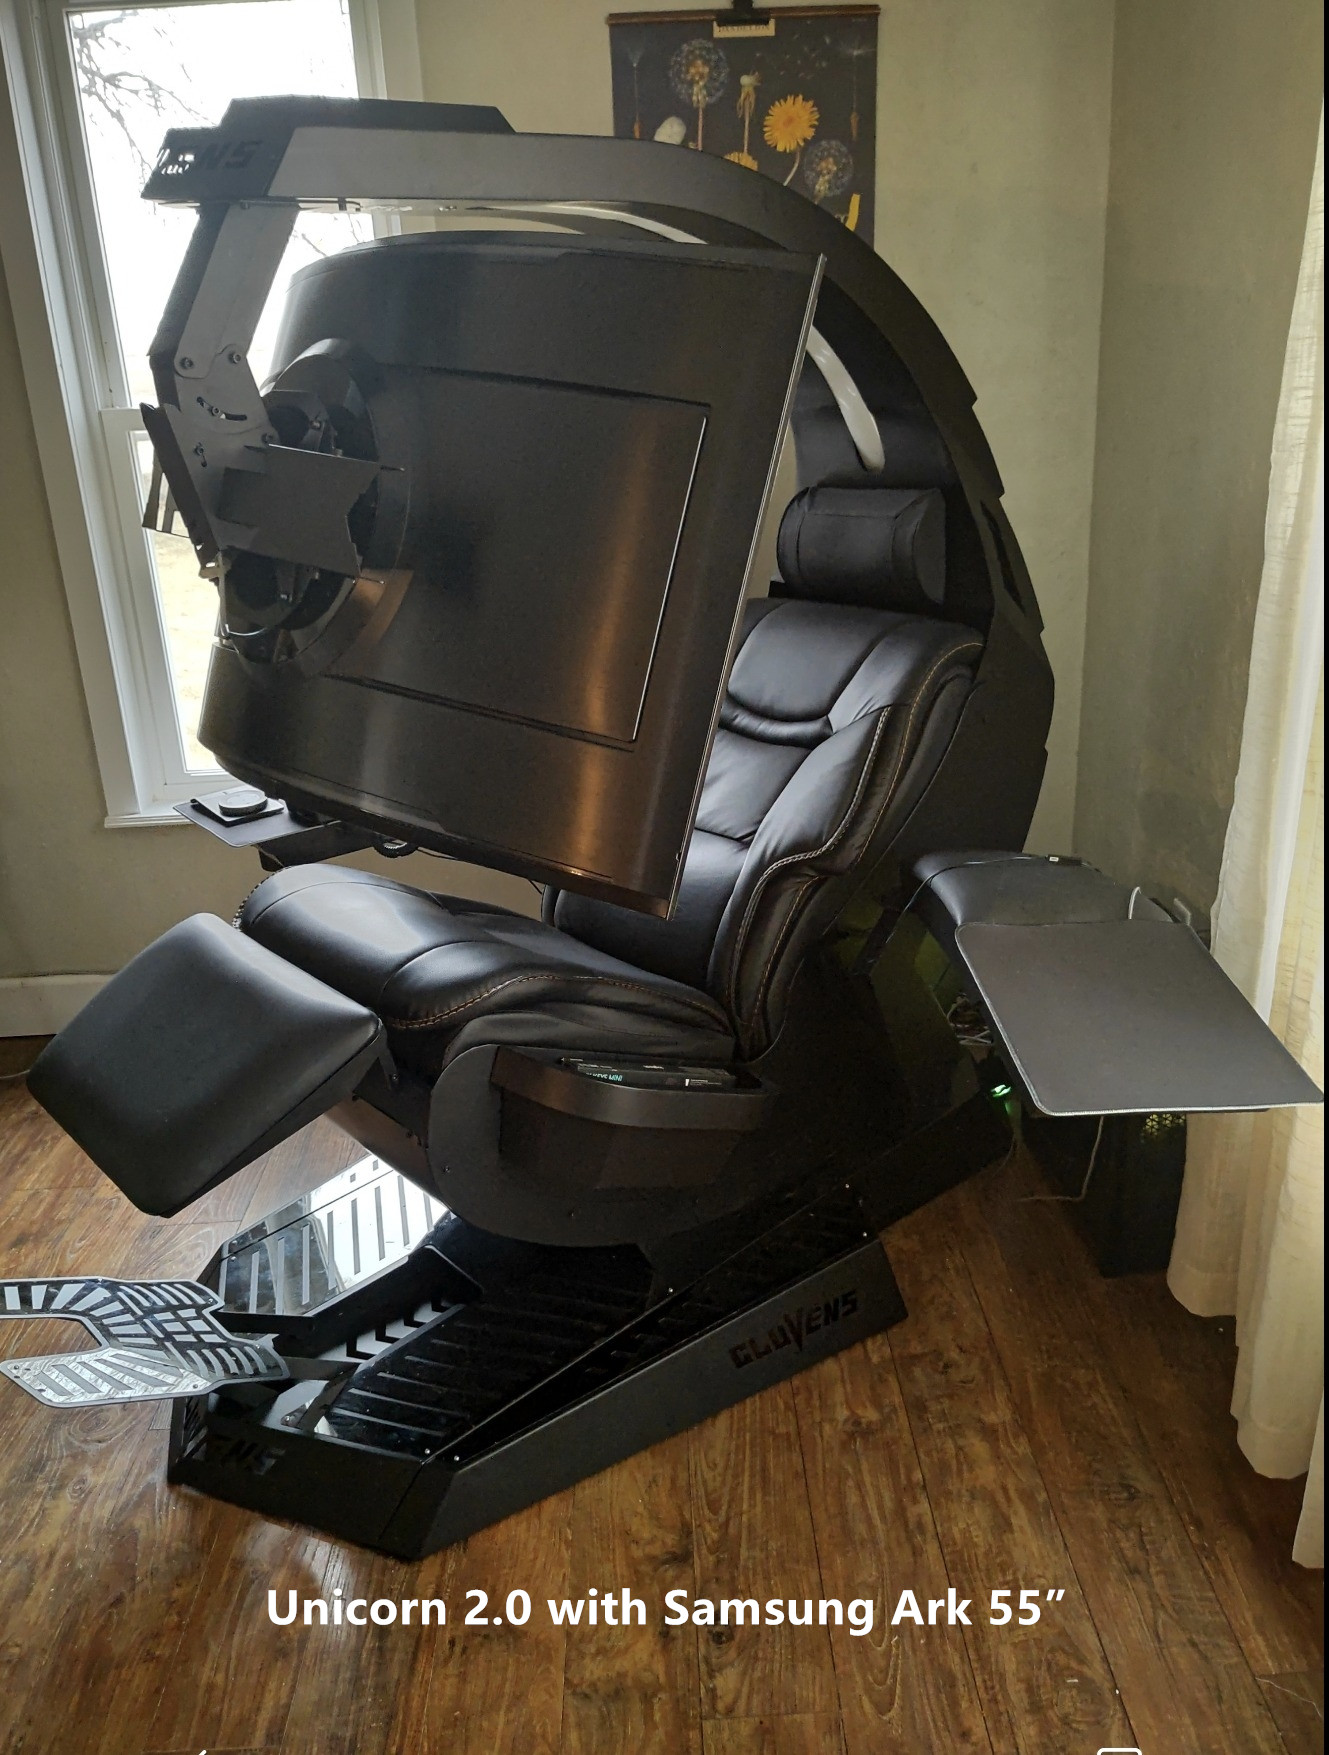 2023 Cluvens Unicorn 2.0 Manticore  - Most Comfortable Zero Gravity super big recliner angle Genuine Leather Boss Chair cockpit Gaming workstation support upto 5 screens